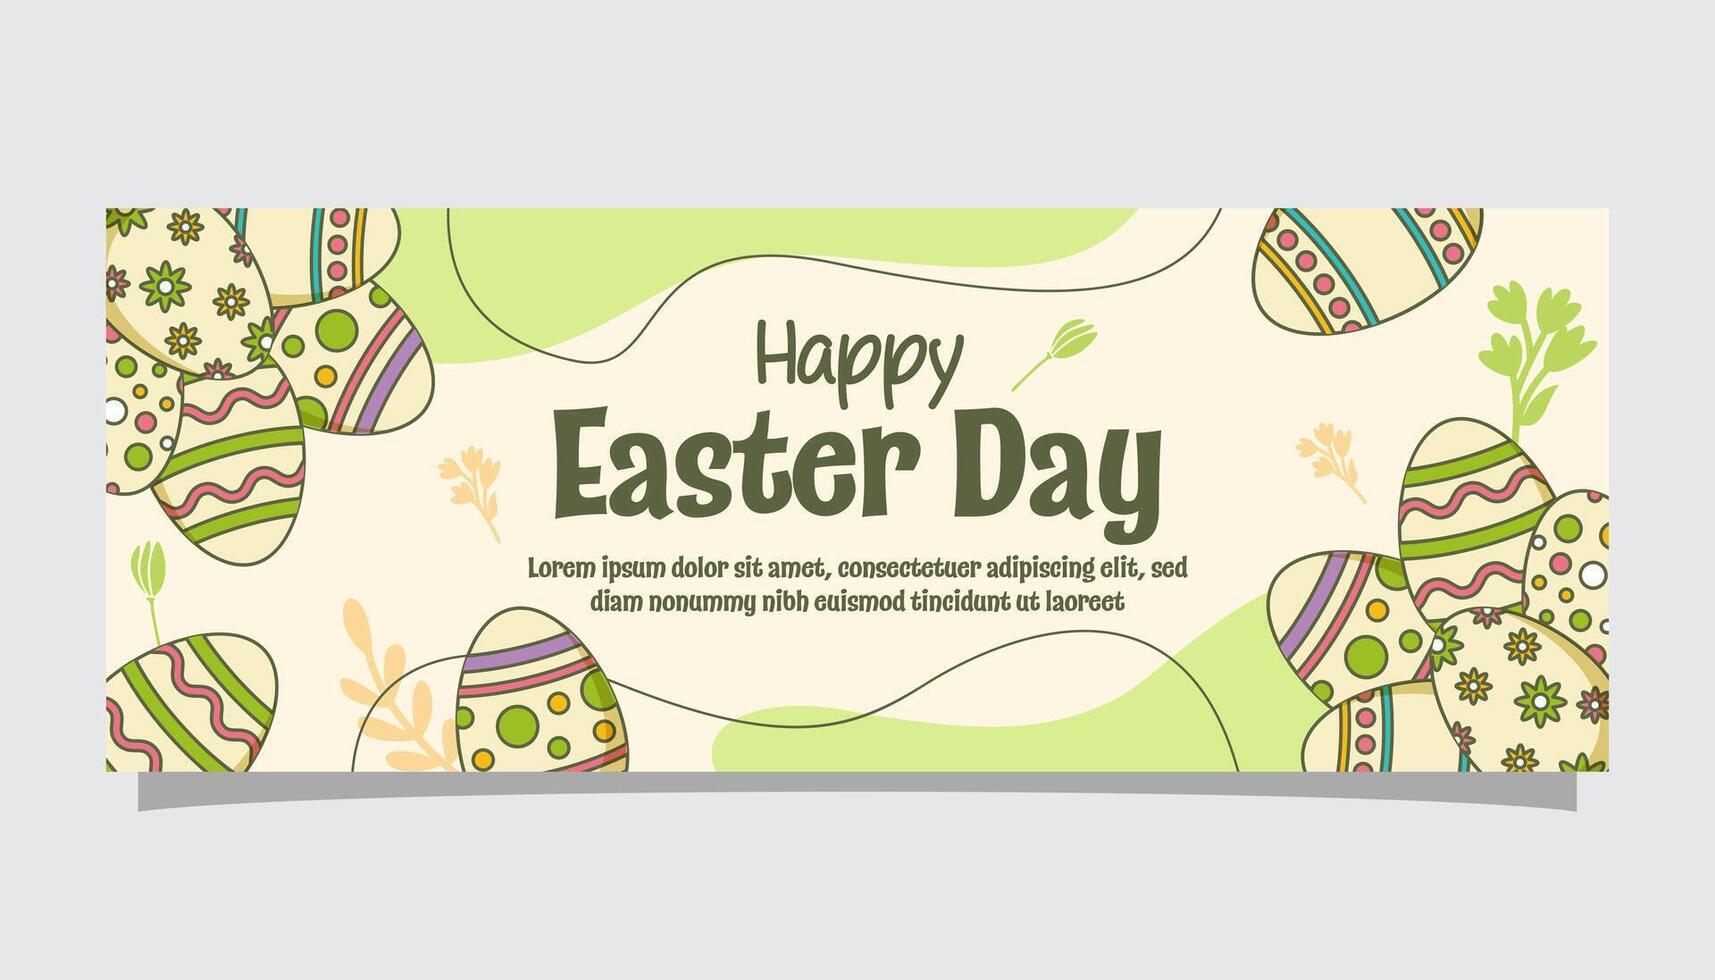 Easter day banner template with egg illustration doodle style vector